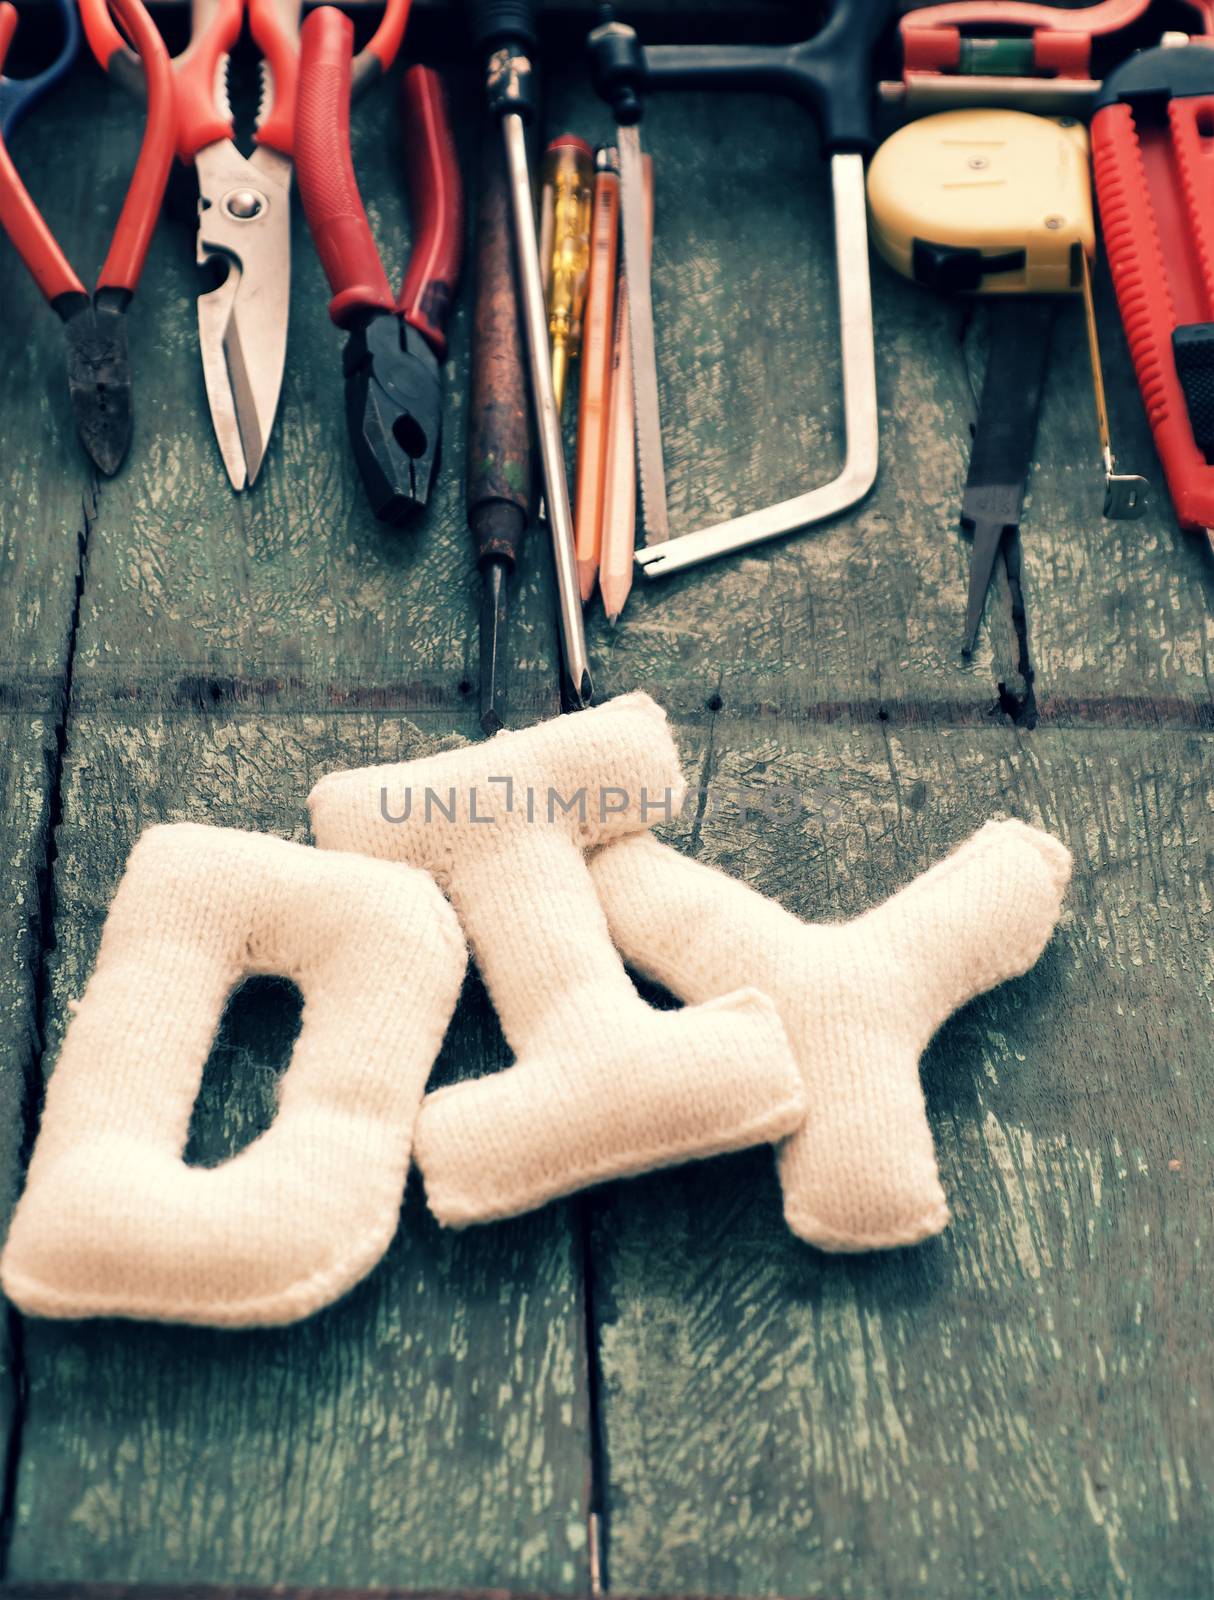 Diy tools background, equipment make handmade product by xuanhuongho